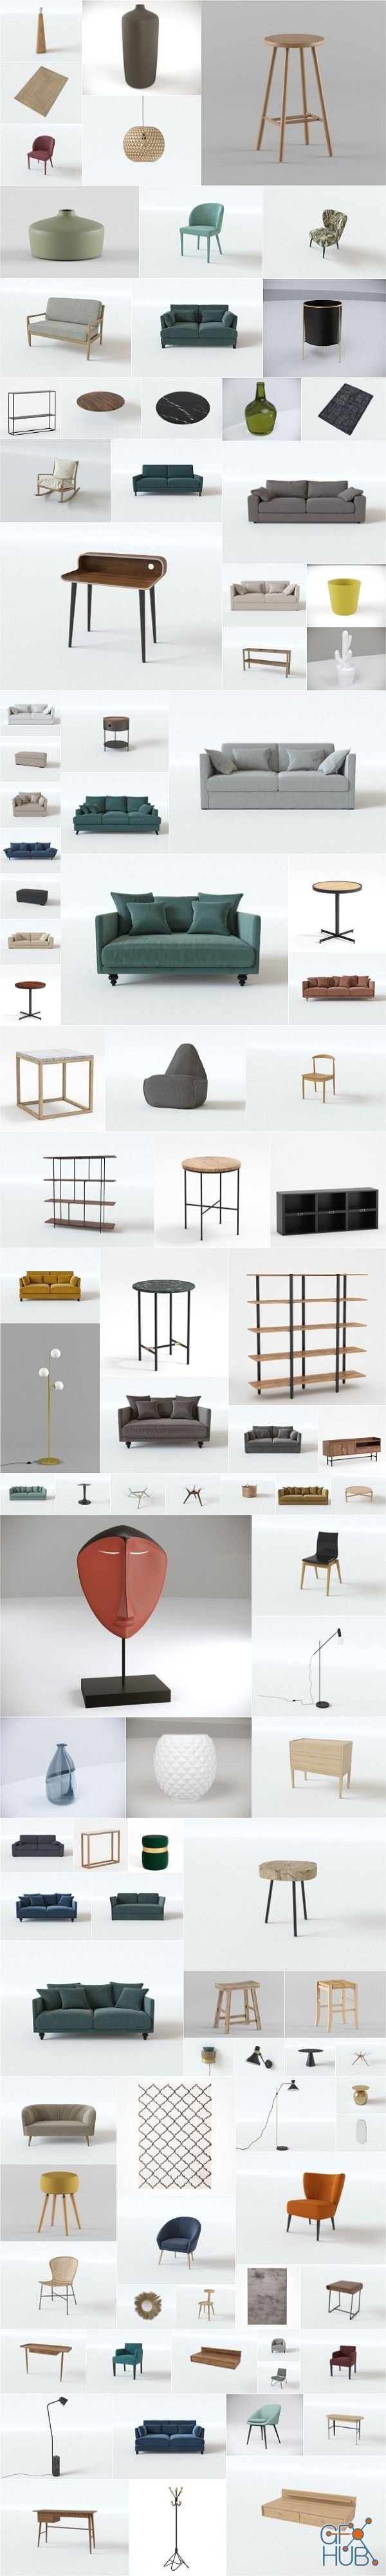 SketchUp 3D Models Collection of Interior Furniture 2020